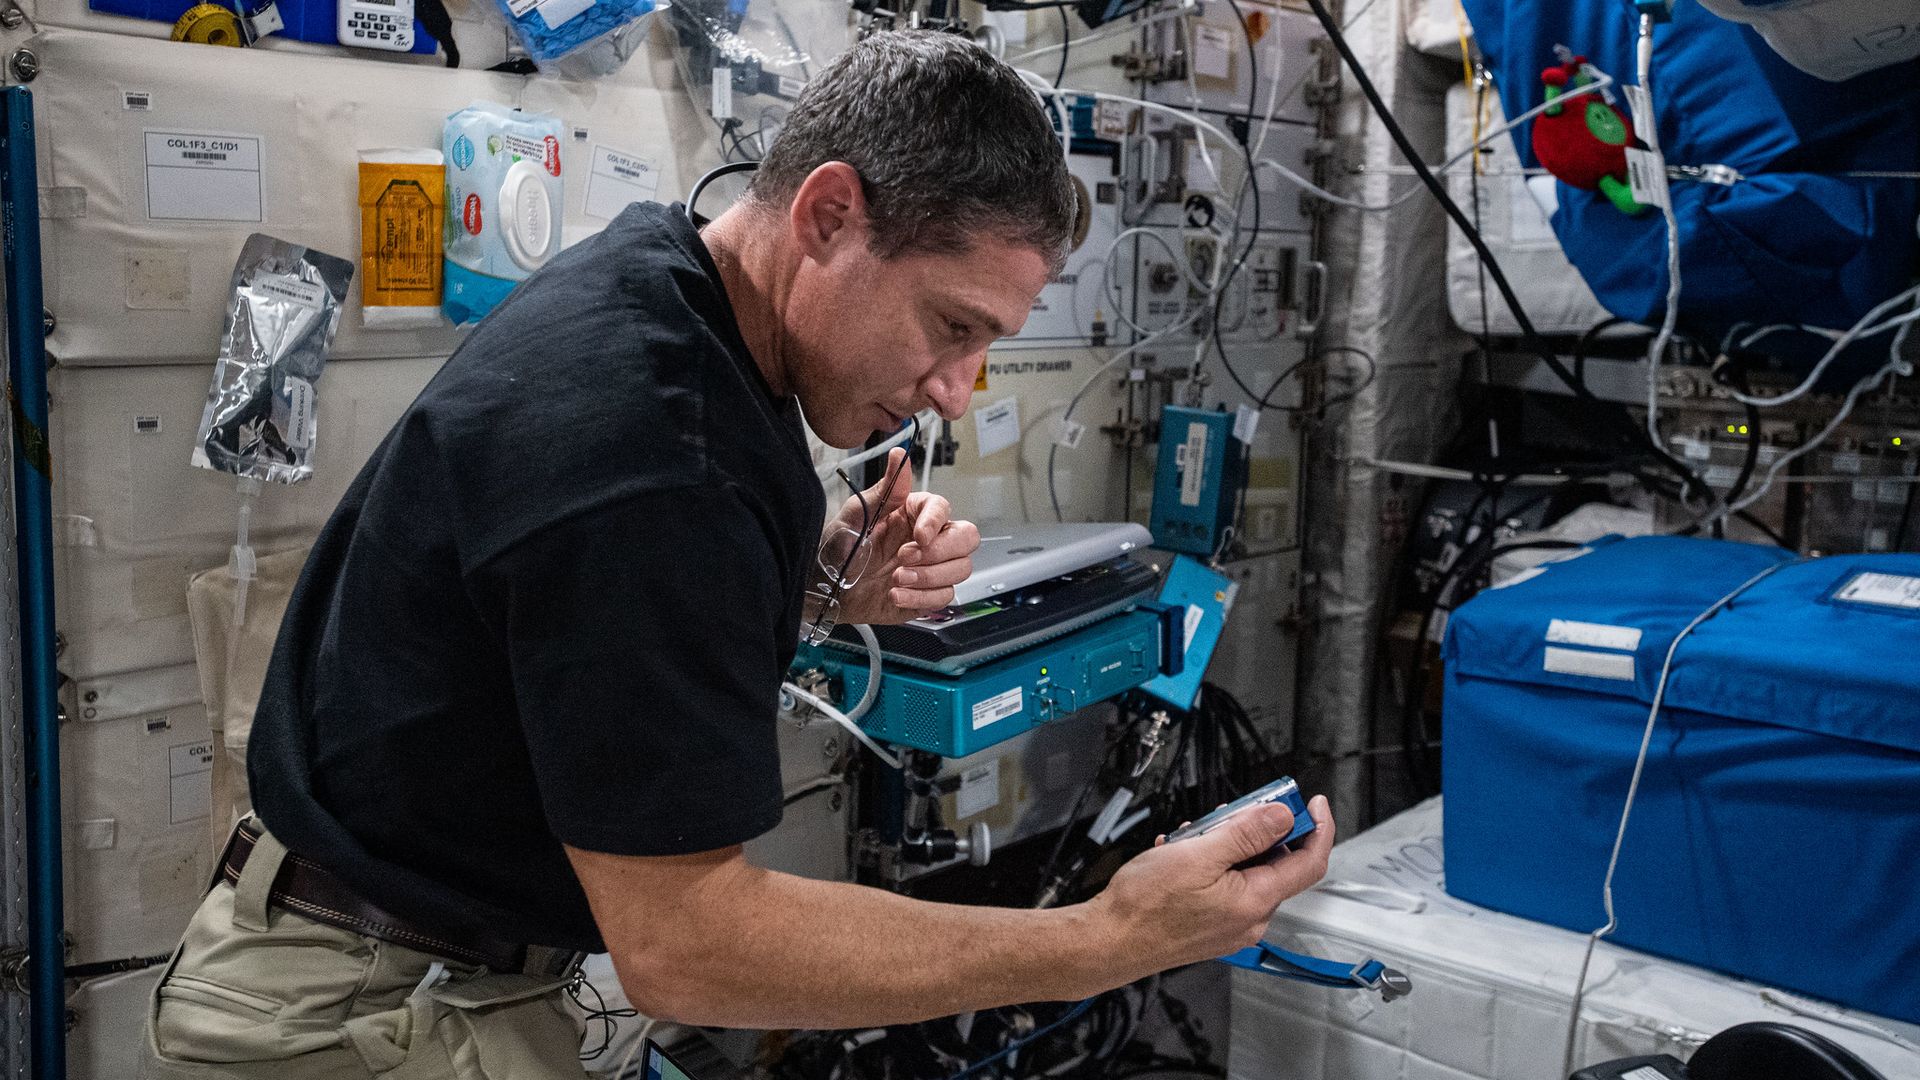 Mike Hopkins looks down at a blue container holding biological samples on the International Space Station